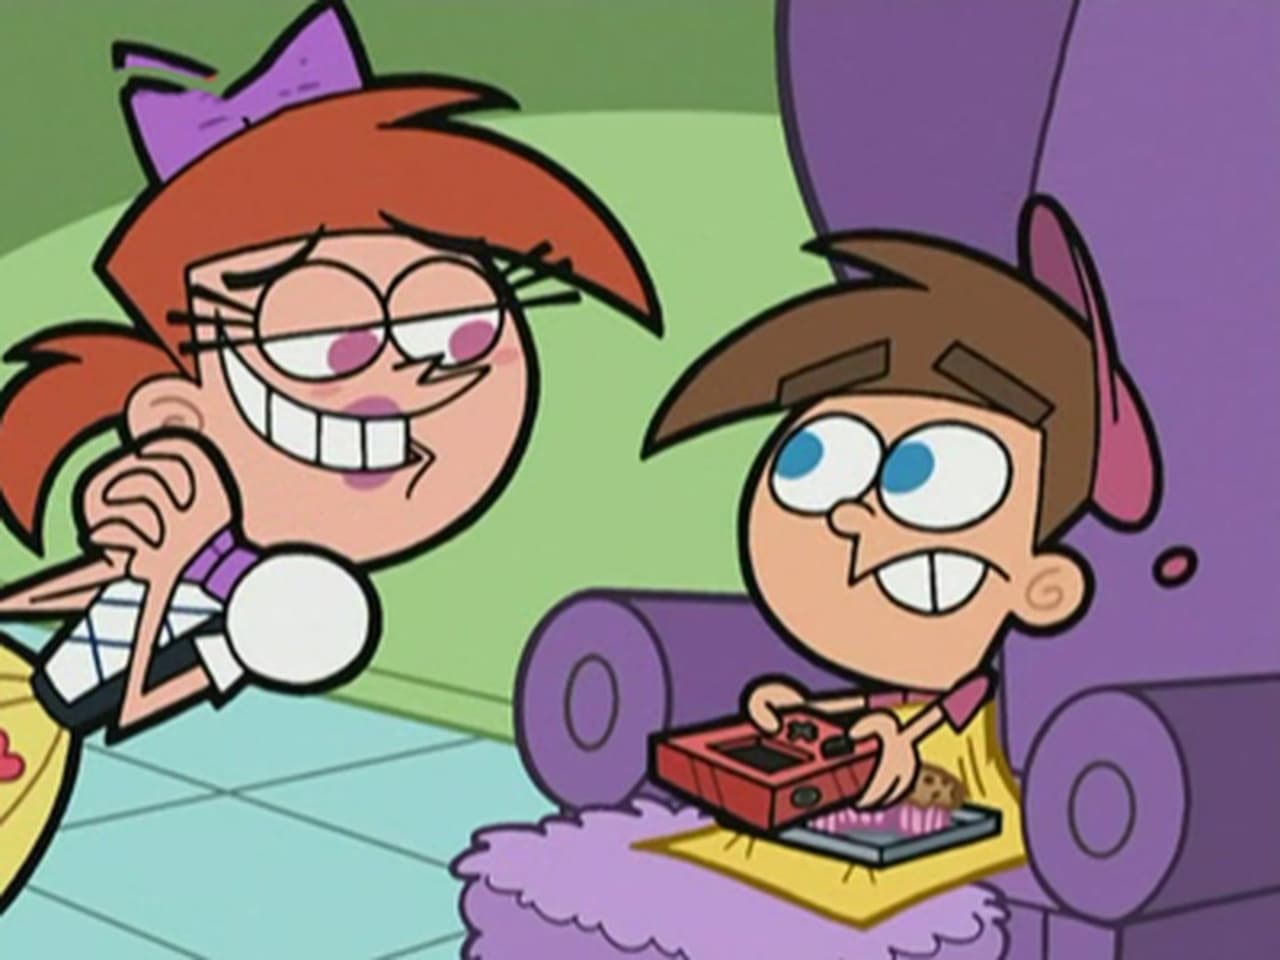 The Fairly OddParents - Season 4 Episode 2 : Vicky Loses Her Icky